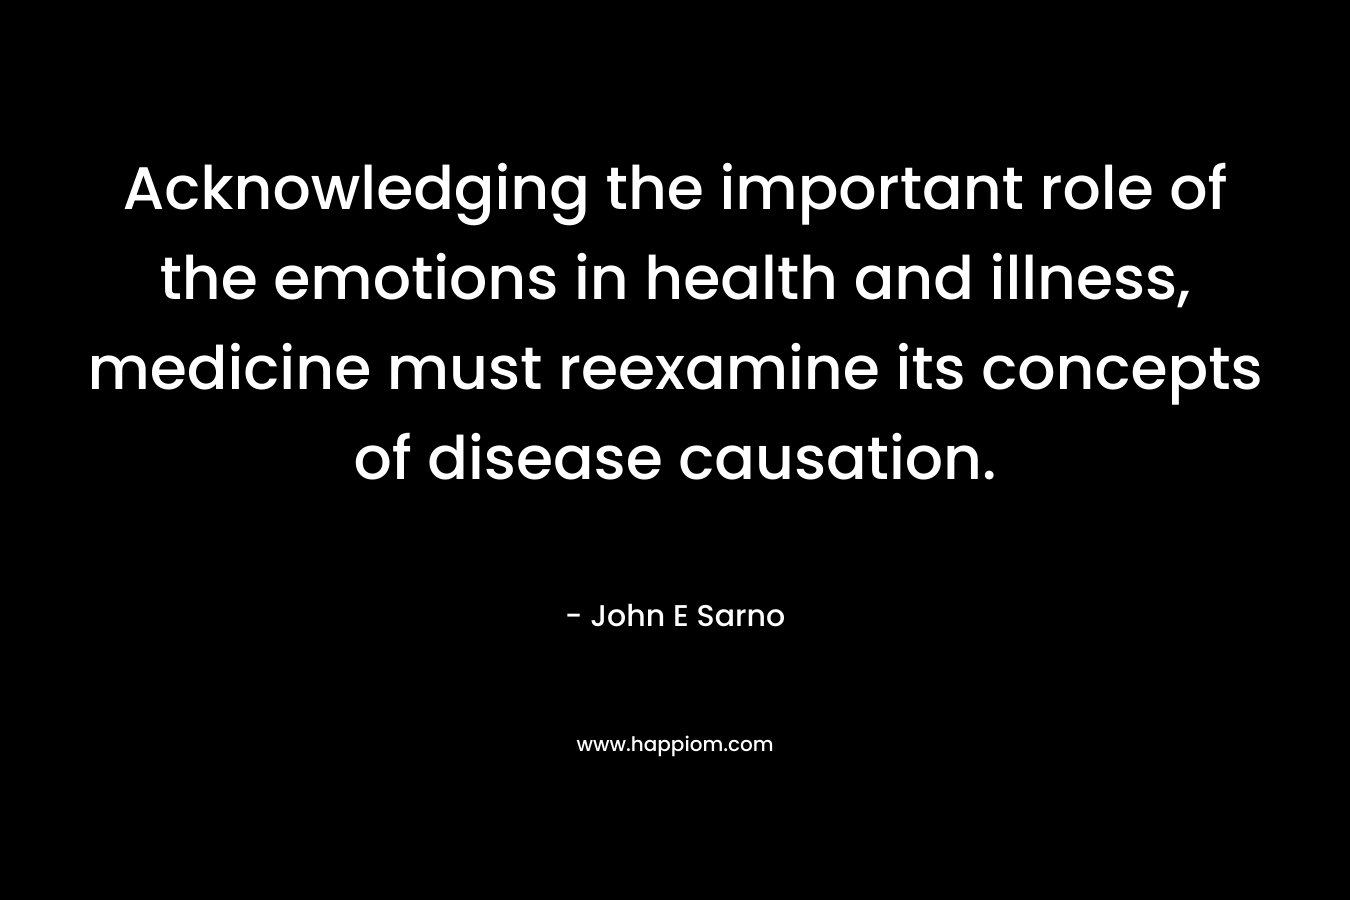 Acknowledging the important role of the emotions in health and illness, medicine must reexamine its concepts of disease causation. – John E Sarno